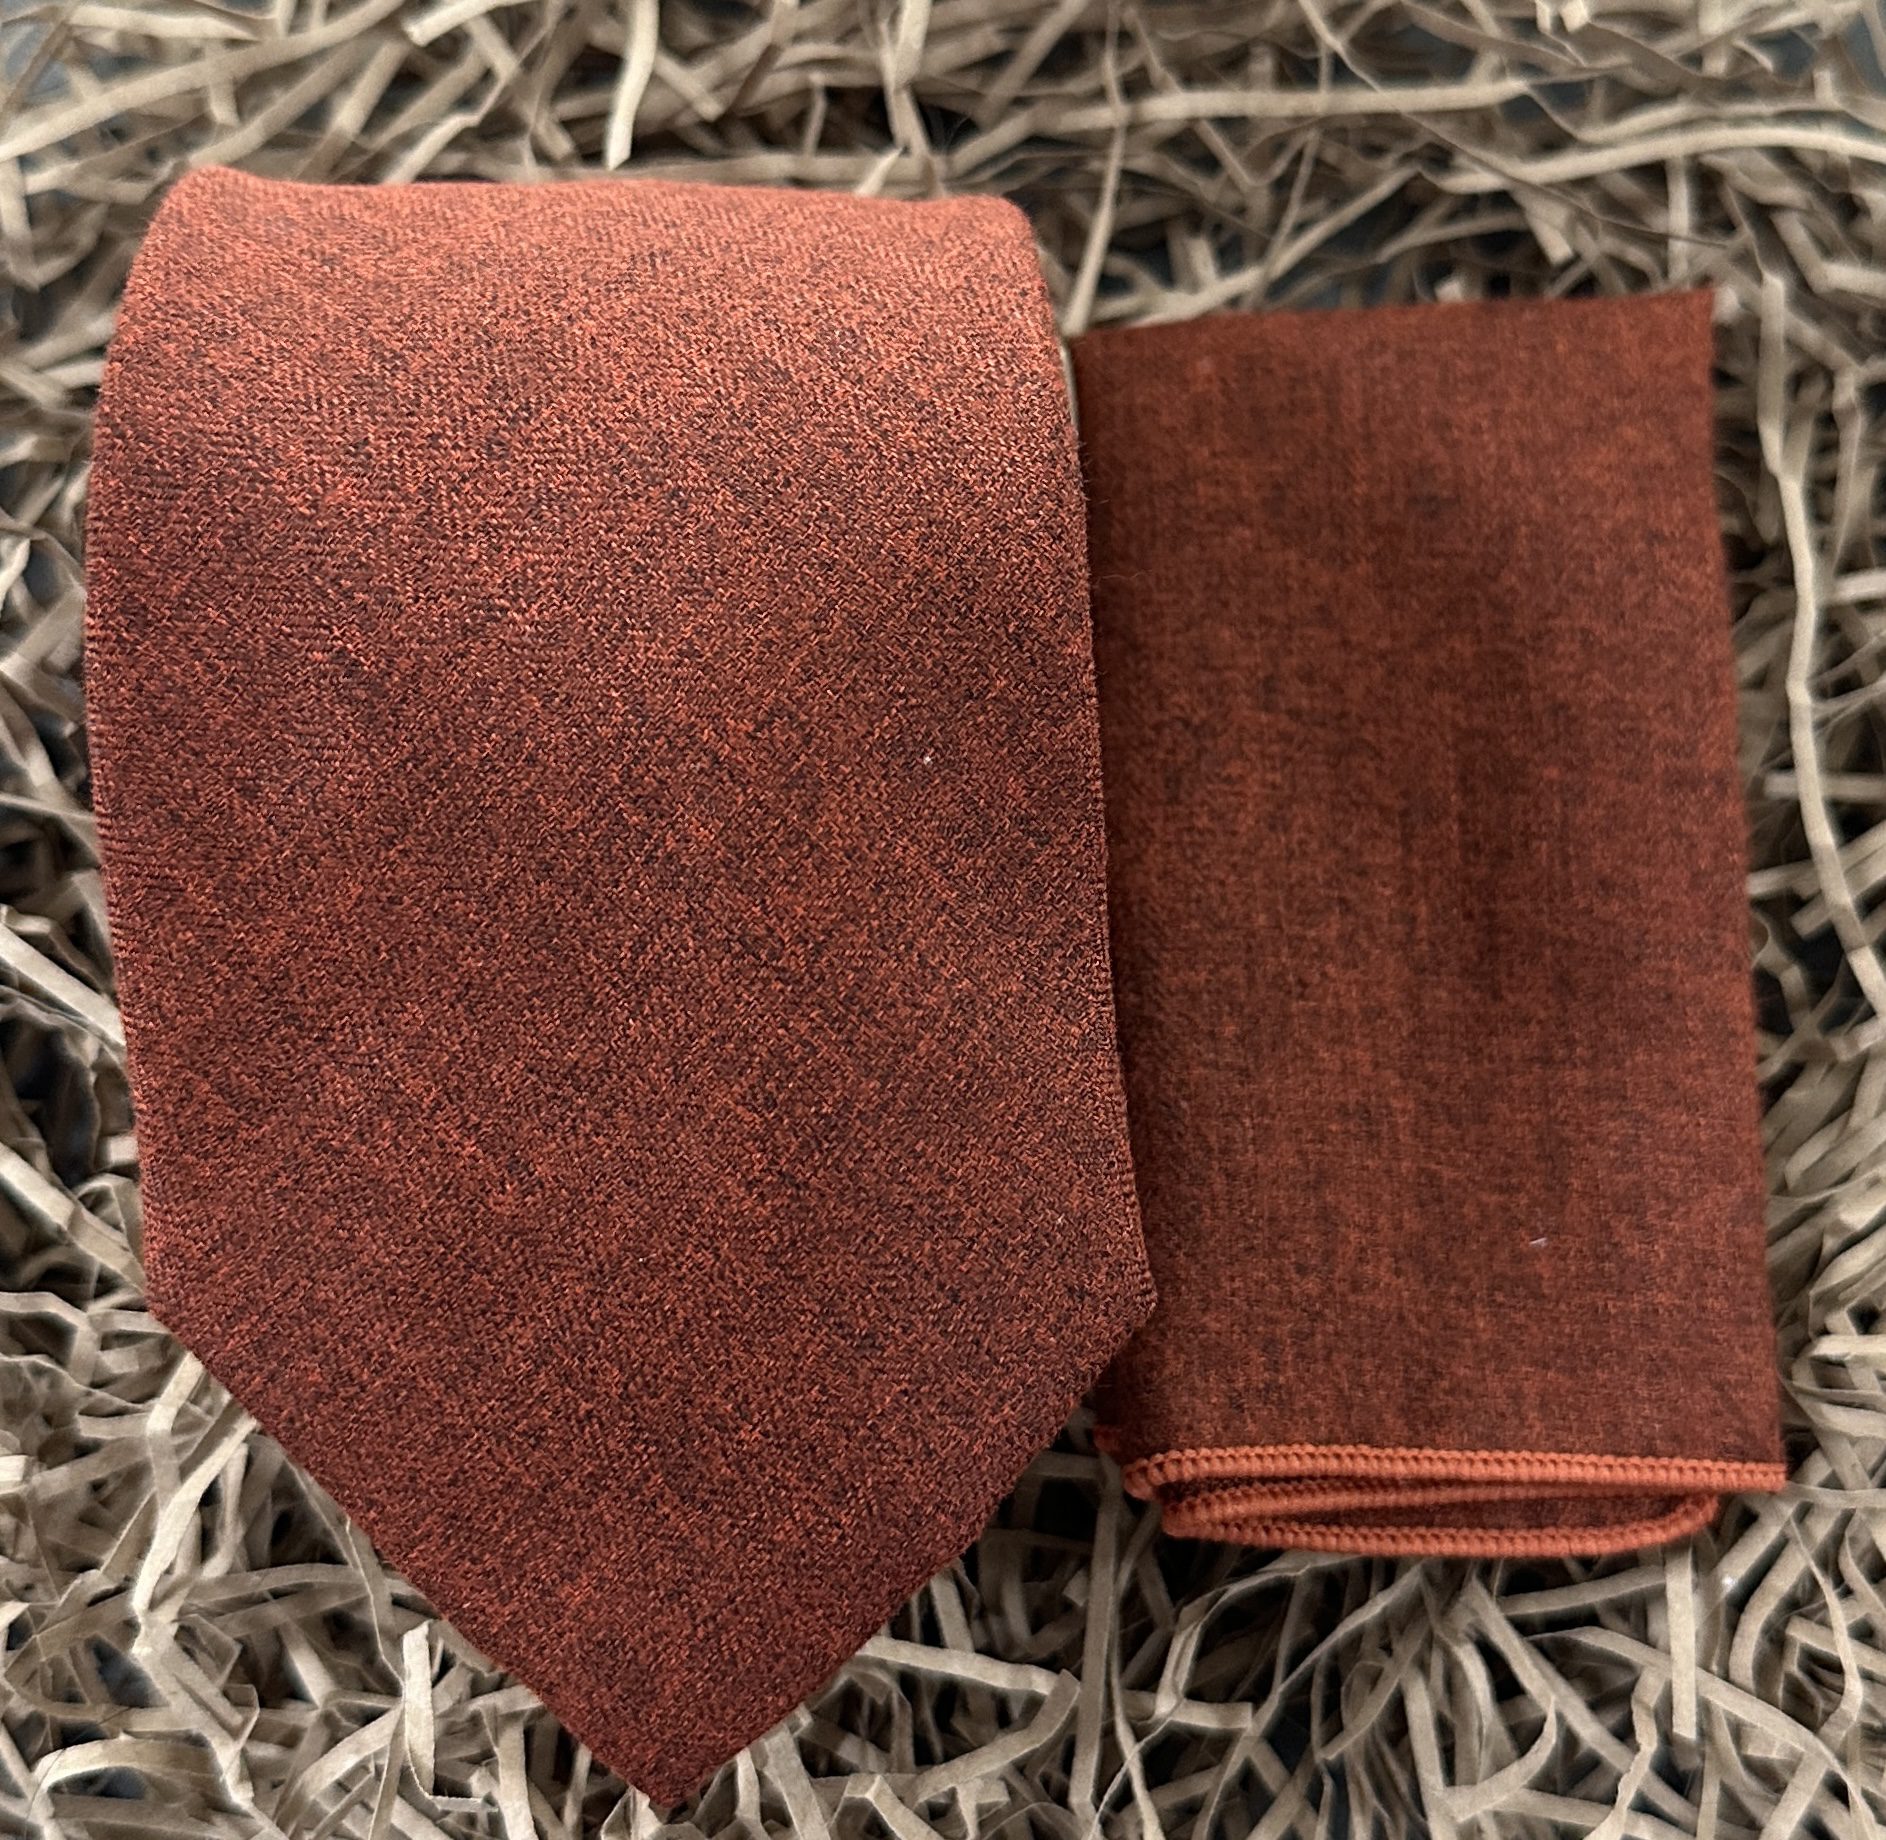 An orange brushed cotton tie and pocket square set ideal for wedding ties and graduation ties.